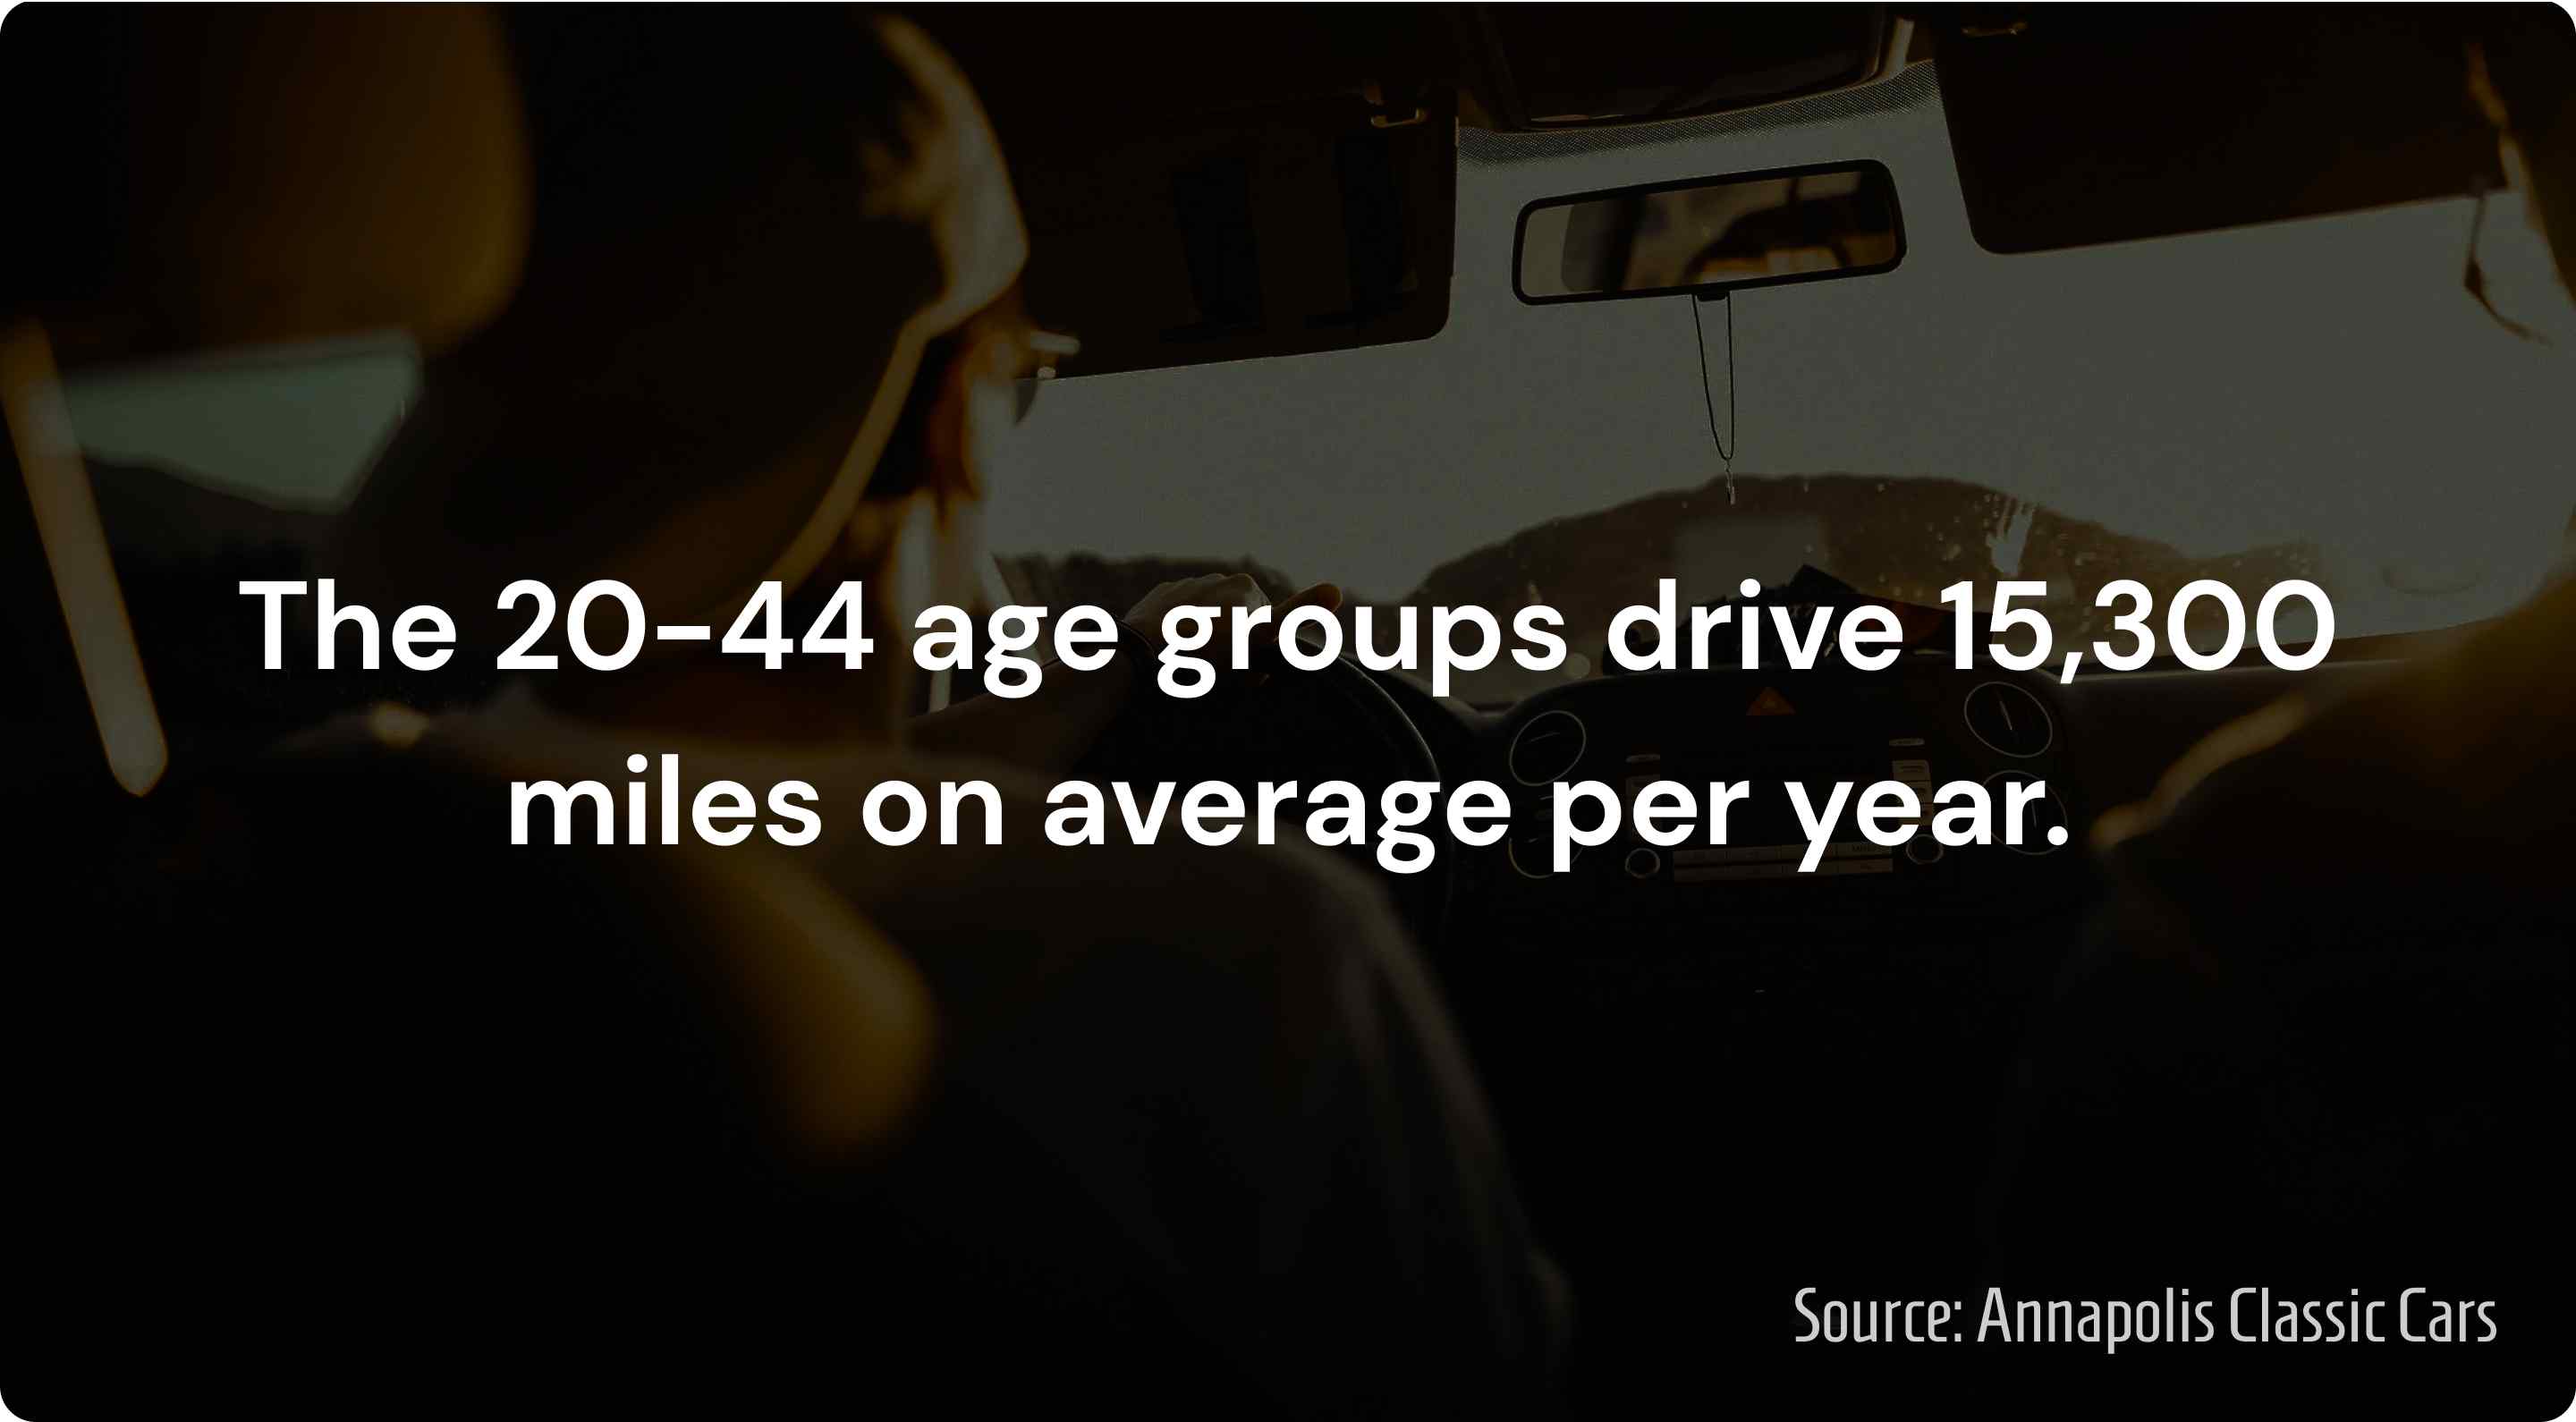 young adults drive 15,300 miles per year